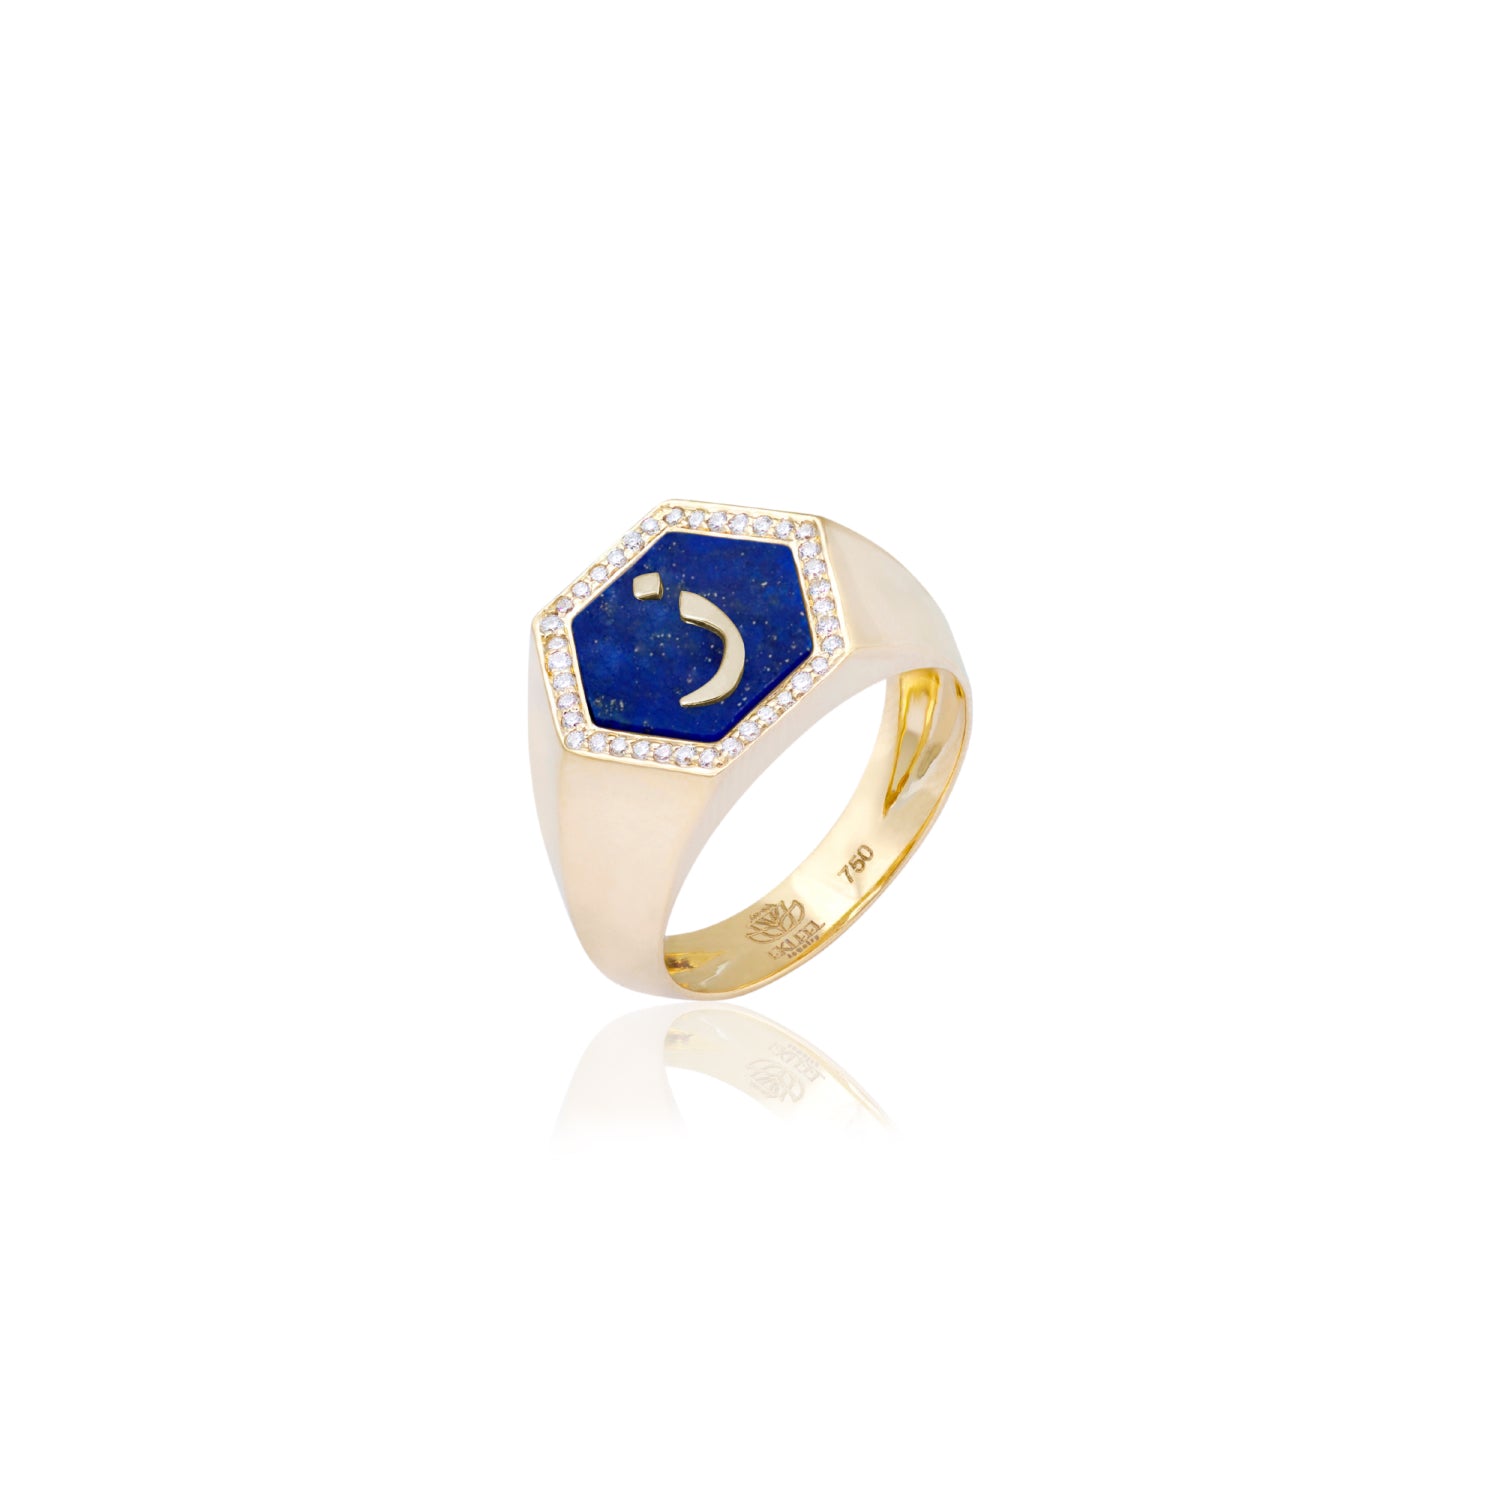 Qamoos 2.0 Letter ز Lapis Lazuli and Diamond Signet Ring in Yellow Gold